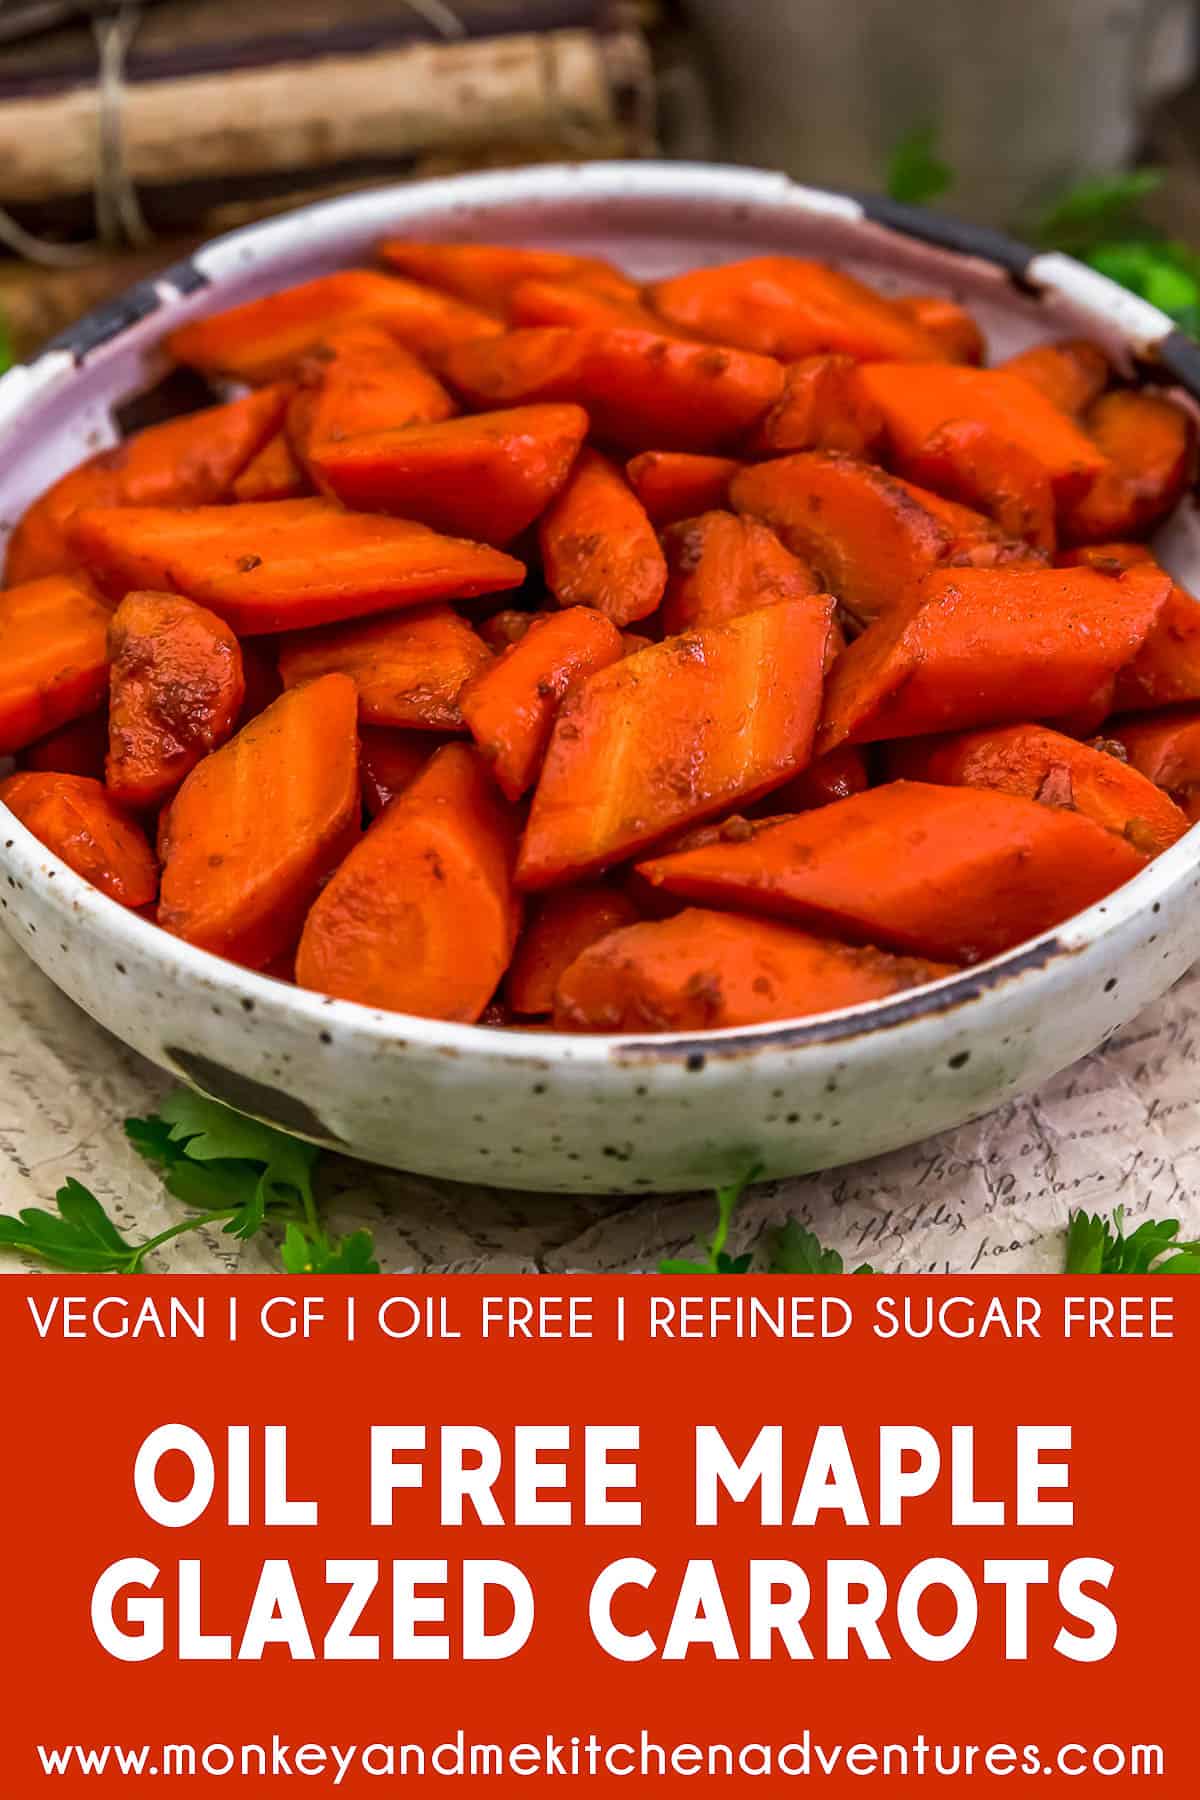 Oil Free Maple Glazed Carrots with text description